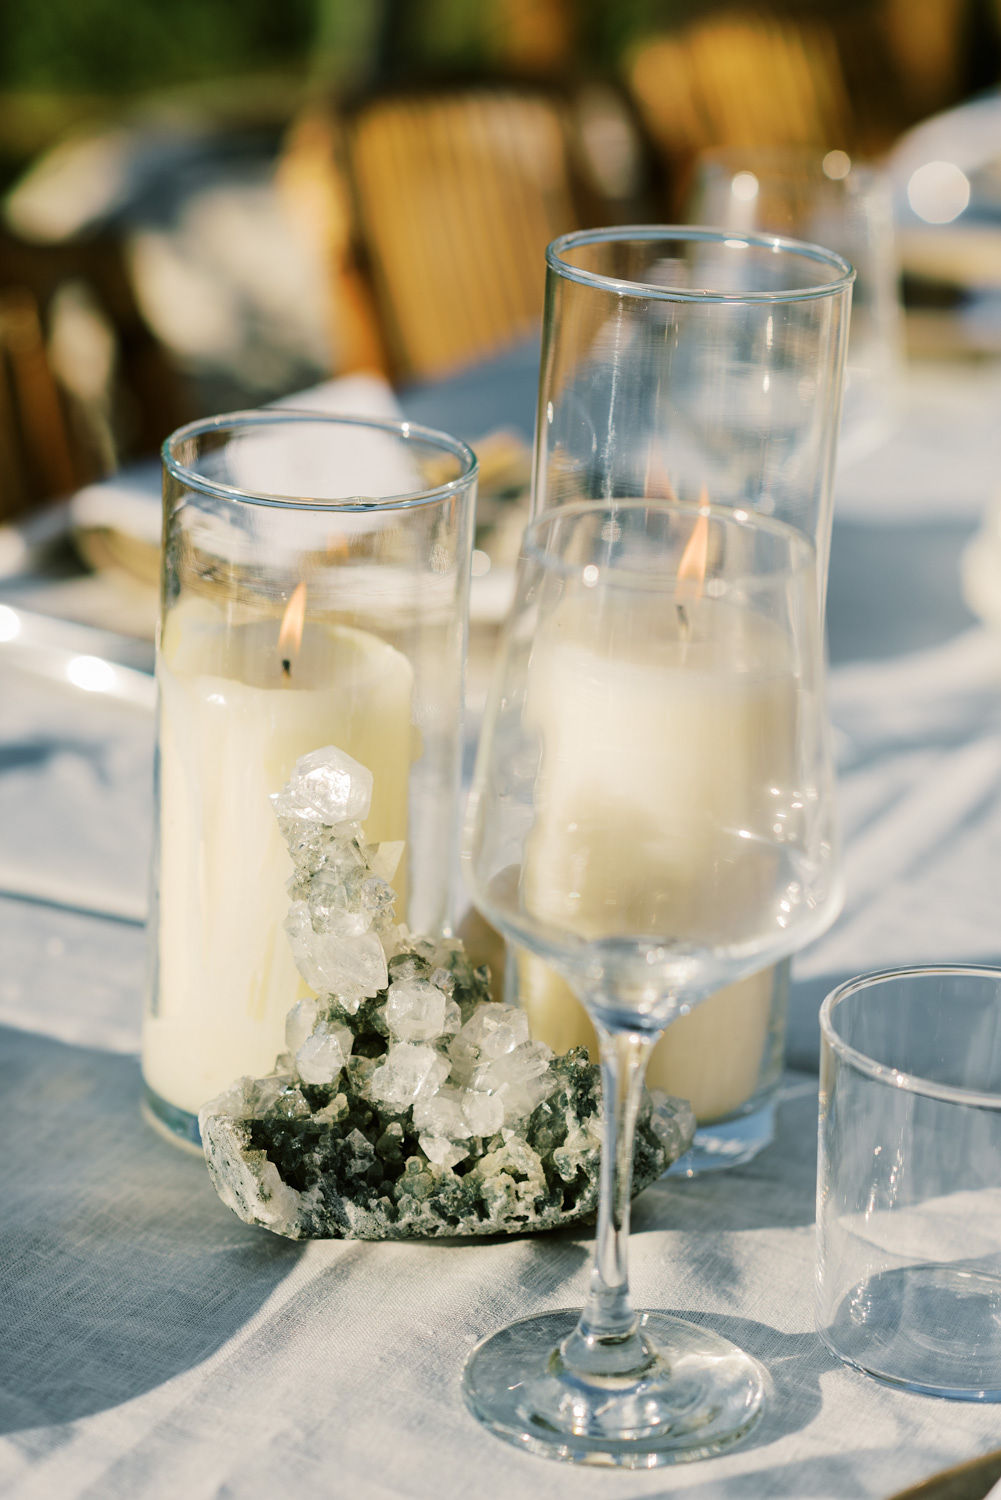 Using crystals in centerpieces